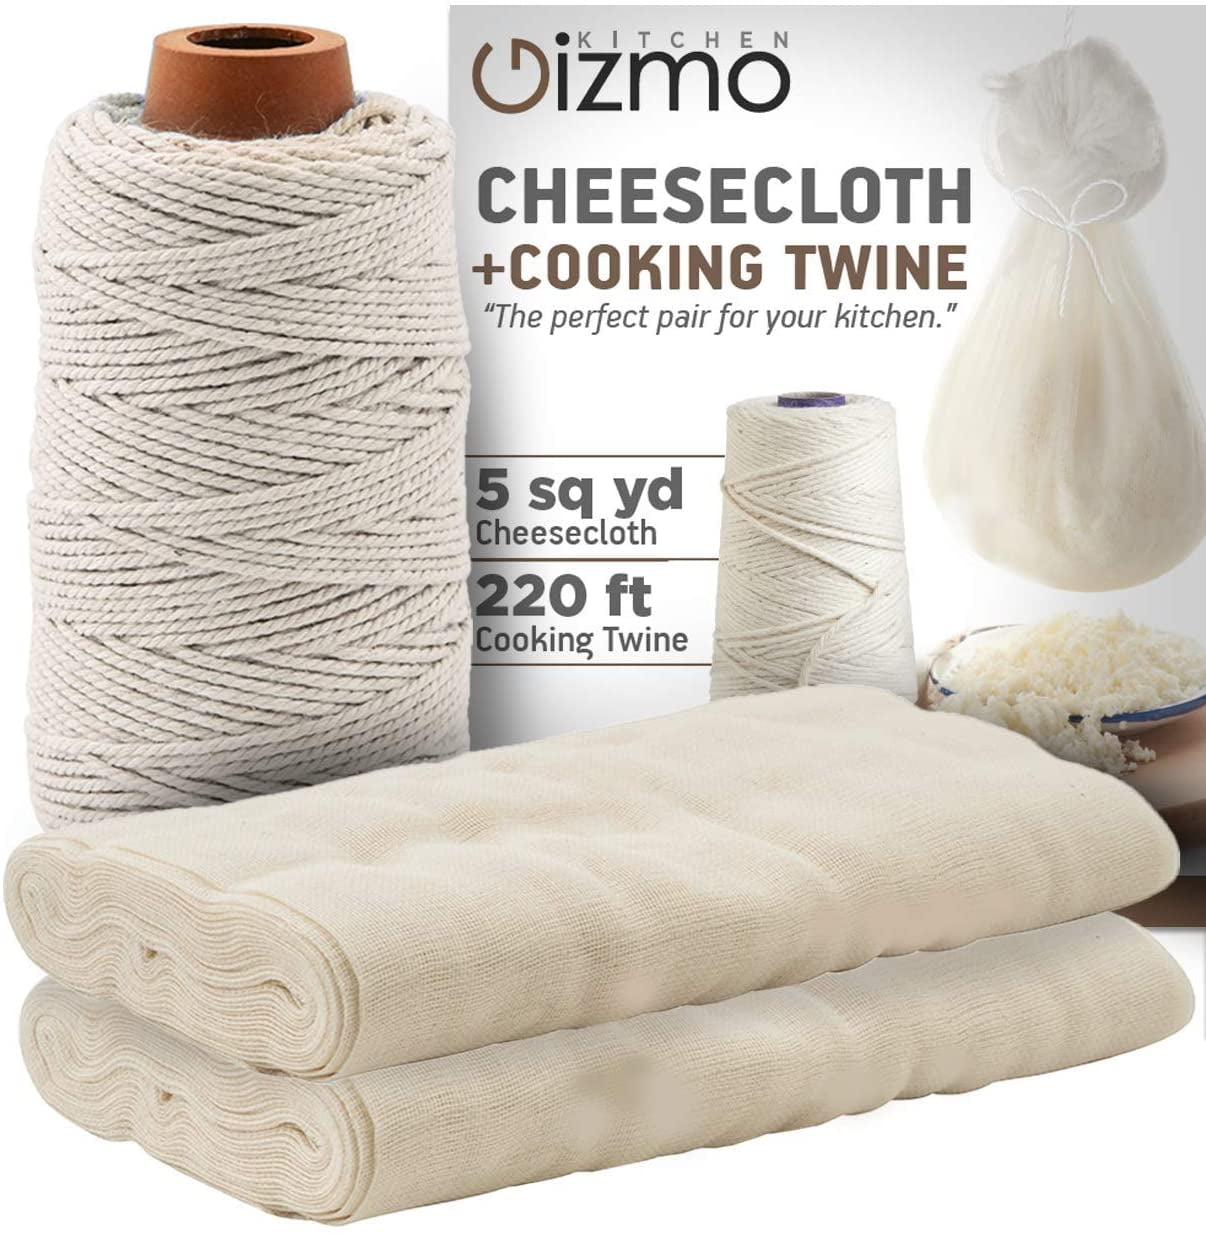  Kitchen Gizmo Cheesecloth and Cooking Twine for Meat - Grade 50  100% Unbleached Cotton Strainer, 2 Sq. Yards Cheese Cloth for Straining, w/  220ft. Butcher Twine, Food Grade Bulk Homesteading Supplies